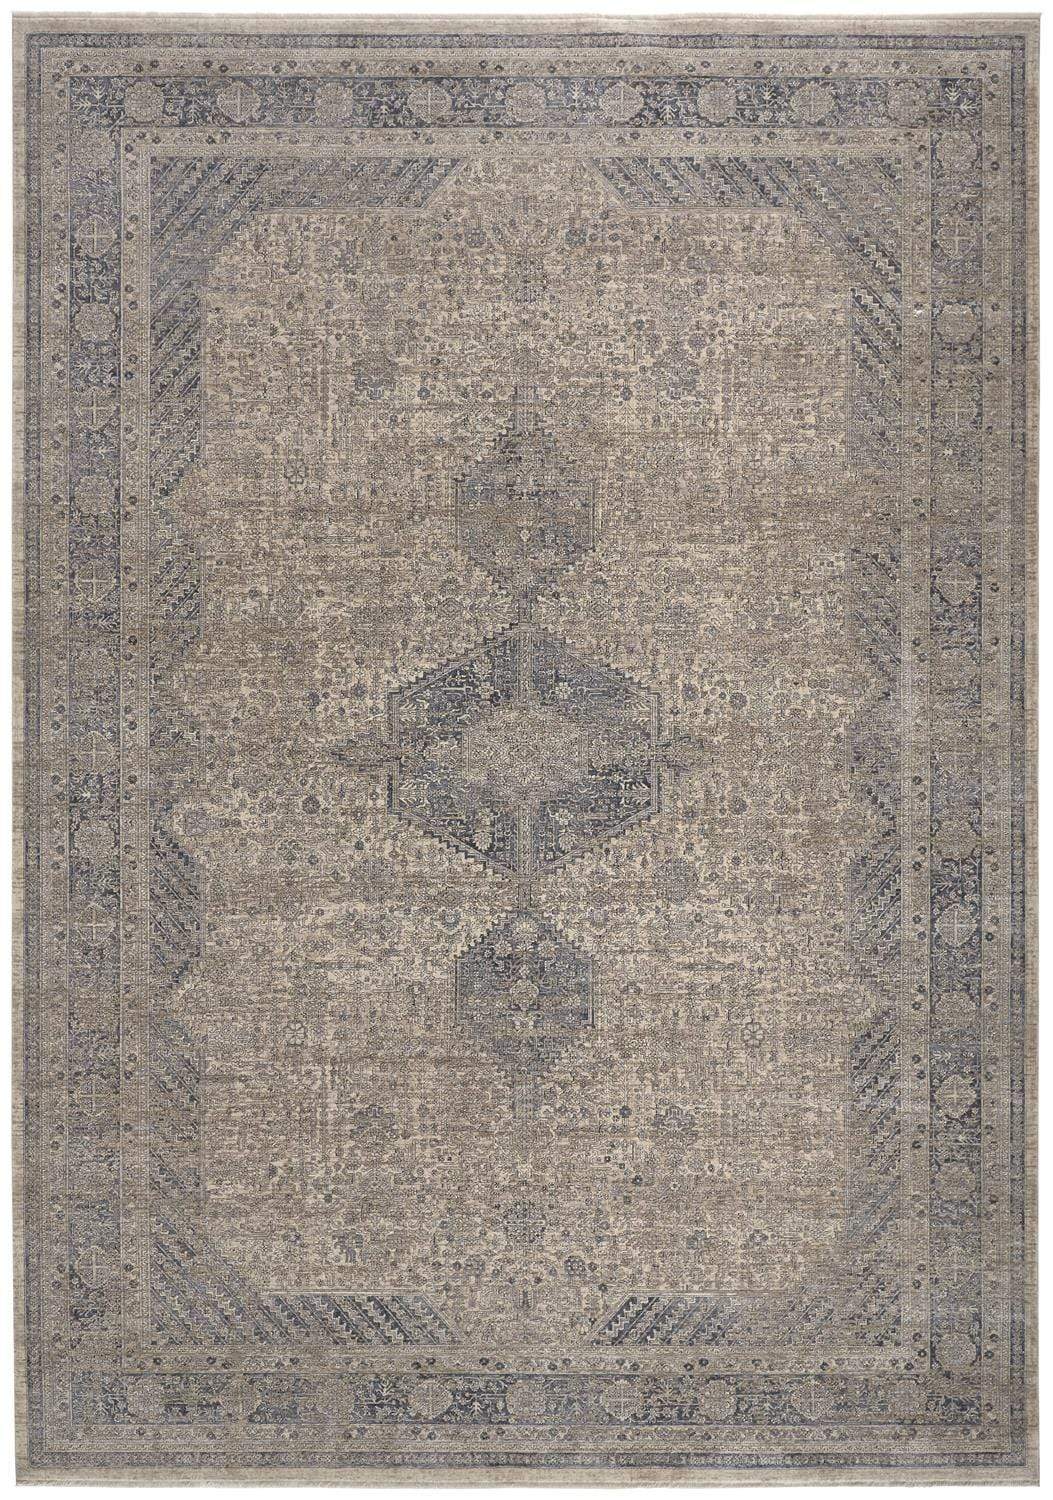 Feizy Feizy Marquette Traditional Persian Style Rug - Warm Gray & Blue - Available in 10 Sizes 4' x 5'-3" MRQ3775FGRY000C06